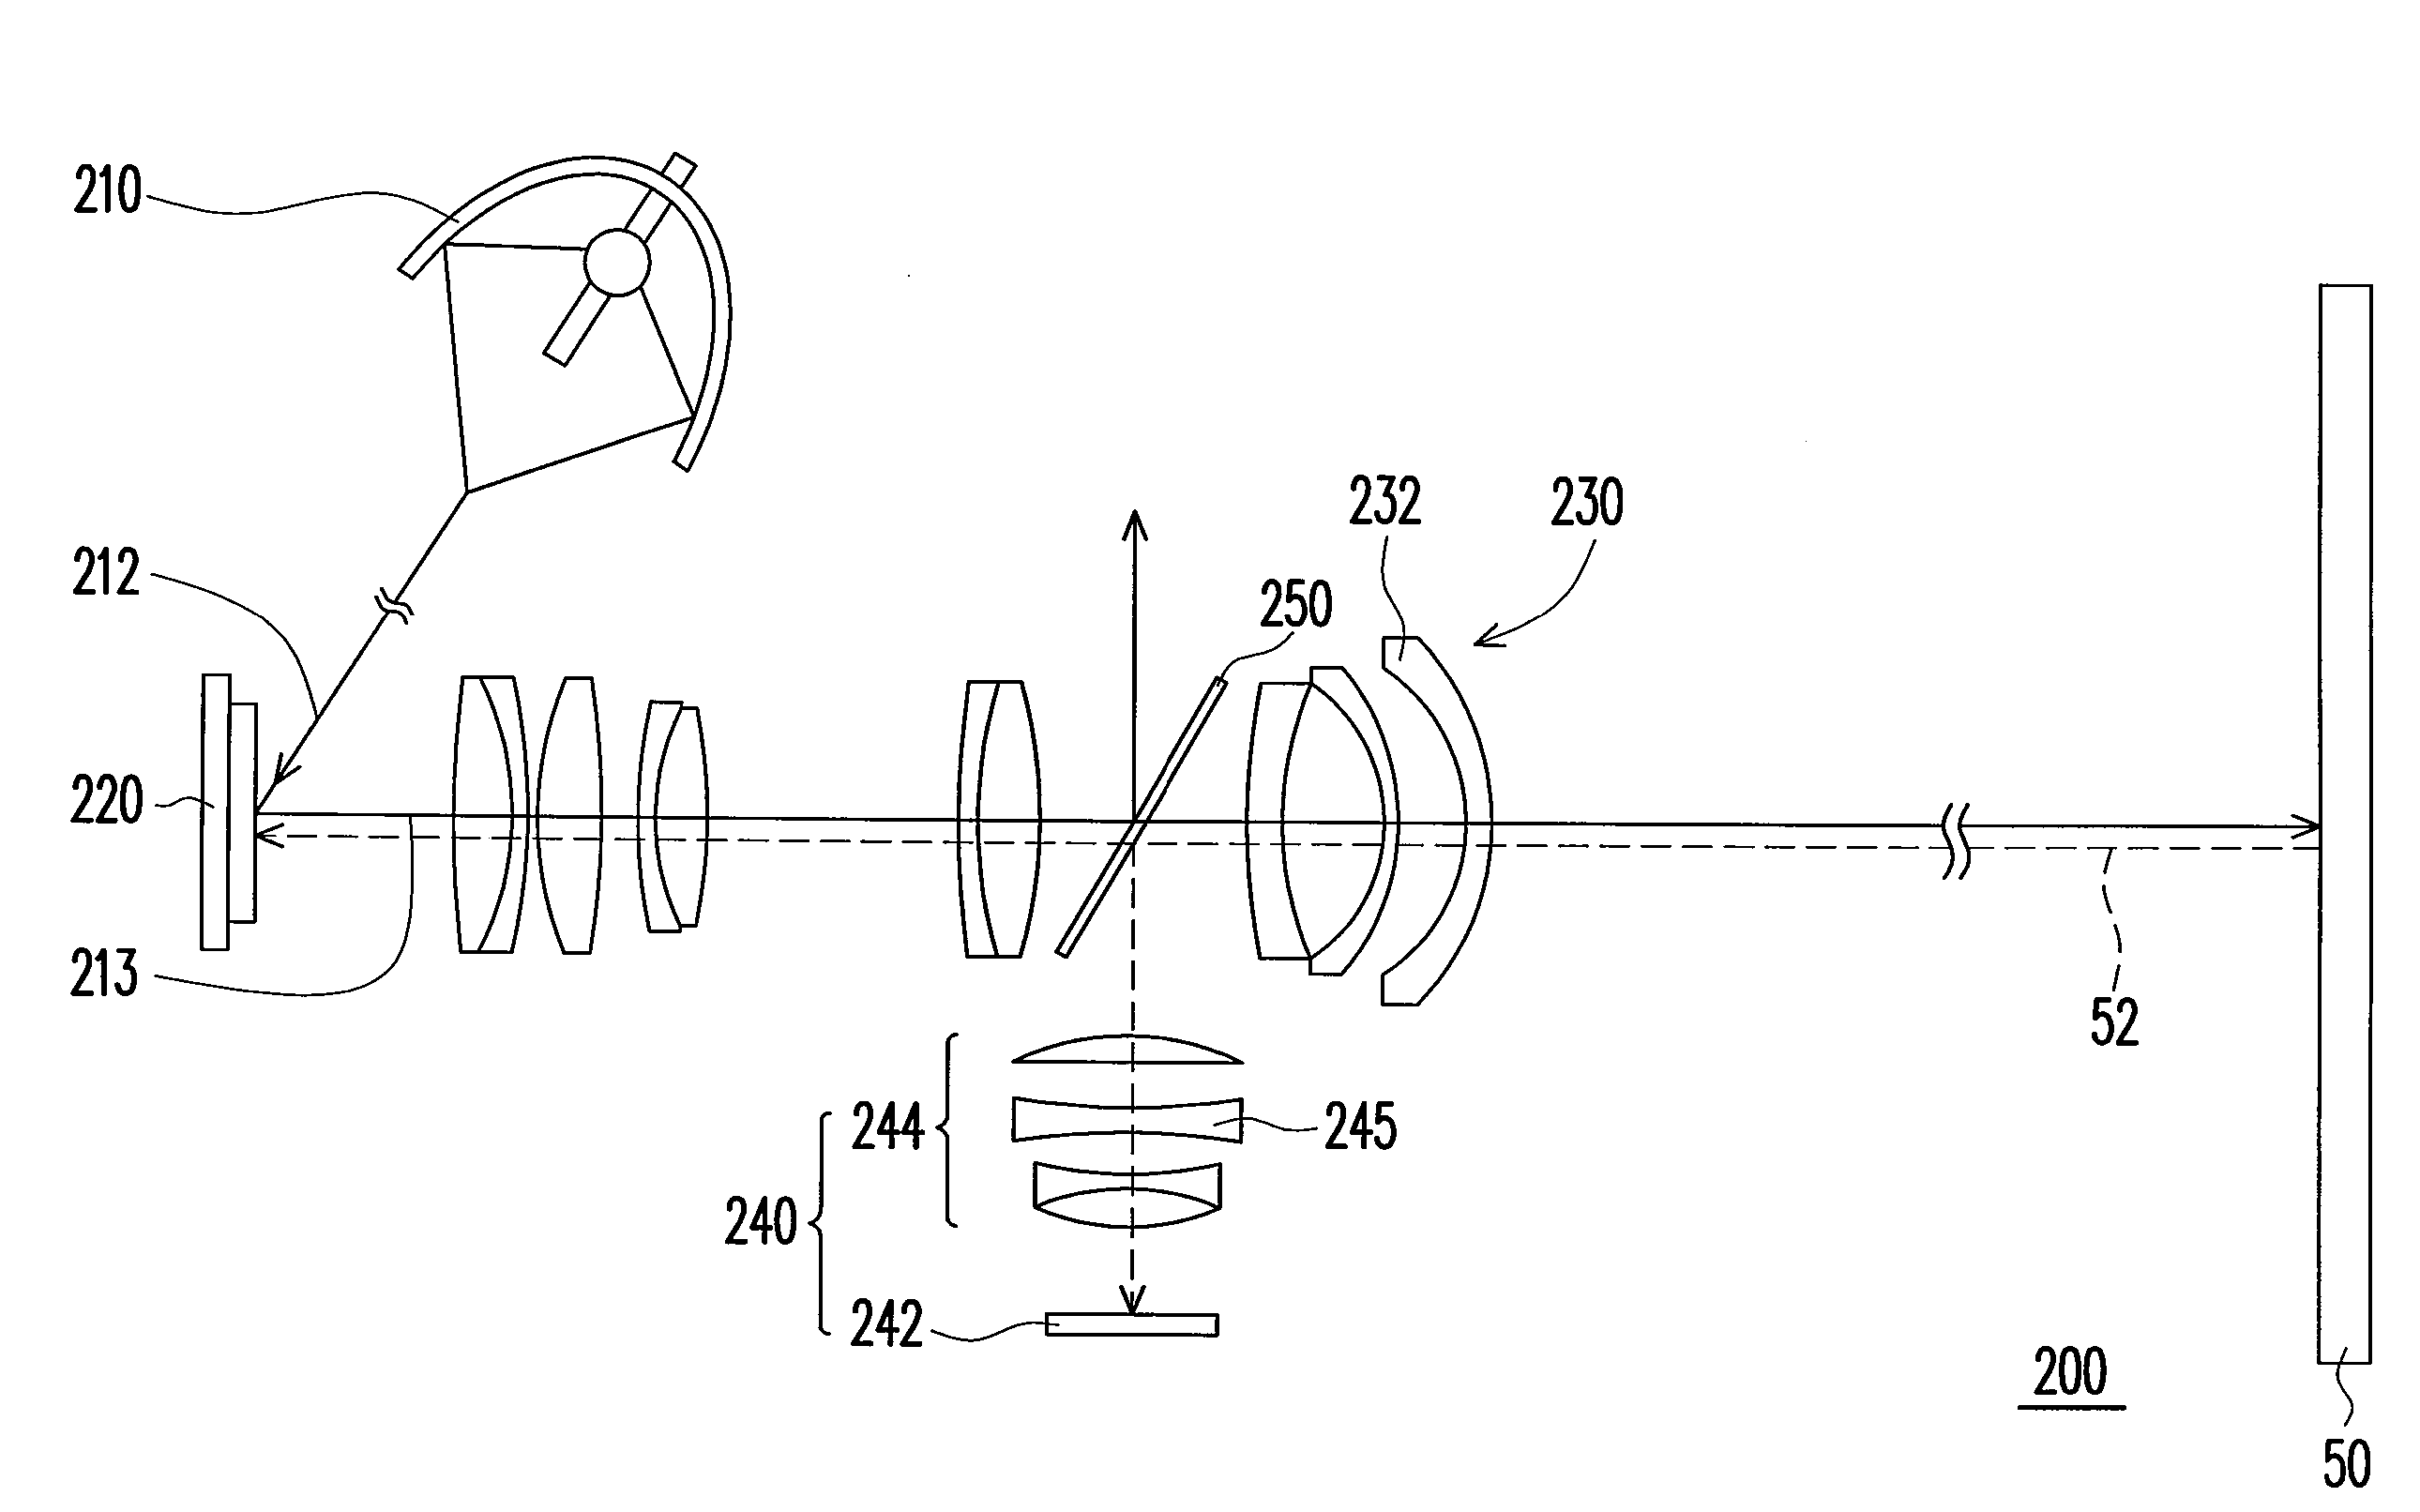 Opitcal projection and image sensing apparatus